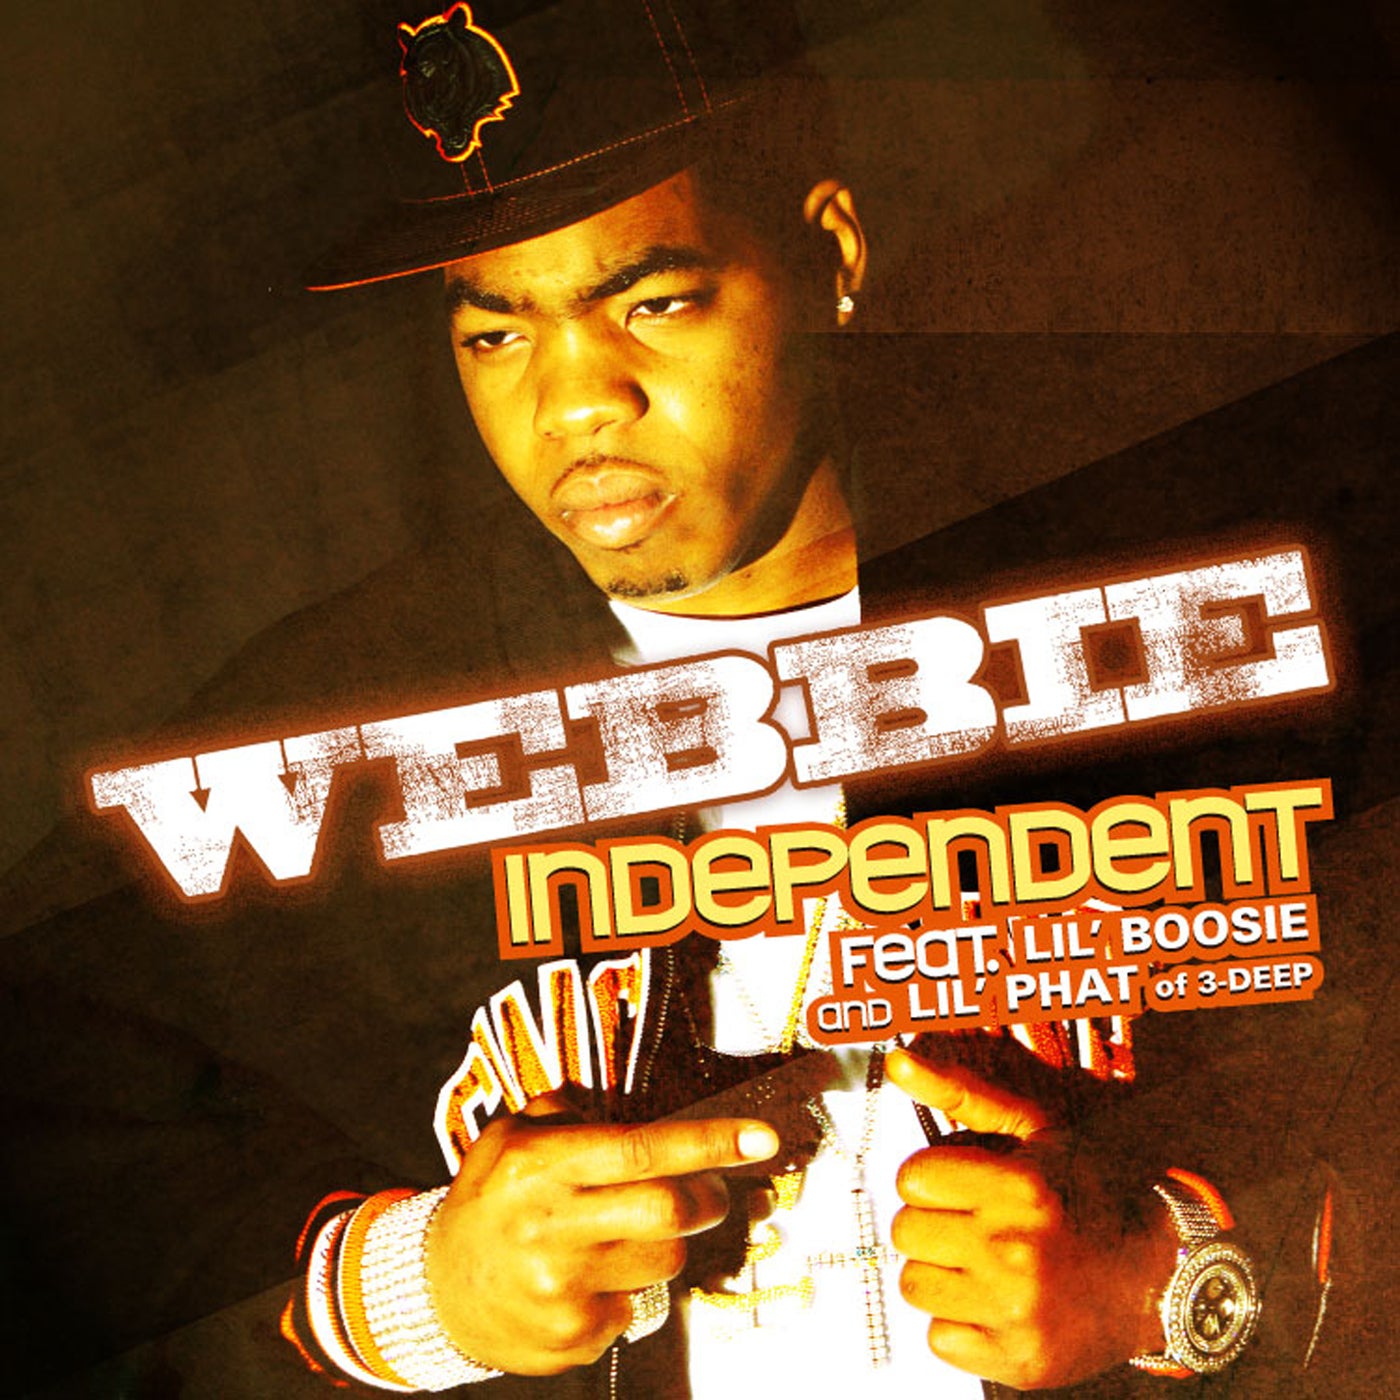 Independent Feat Lil Boosie And Lil Phat By Lil Boosie Webbie And Lil Phat On Beatsource